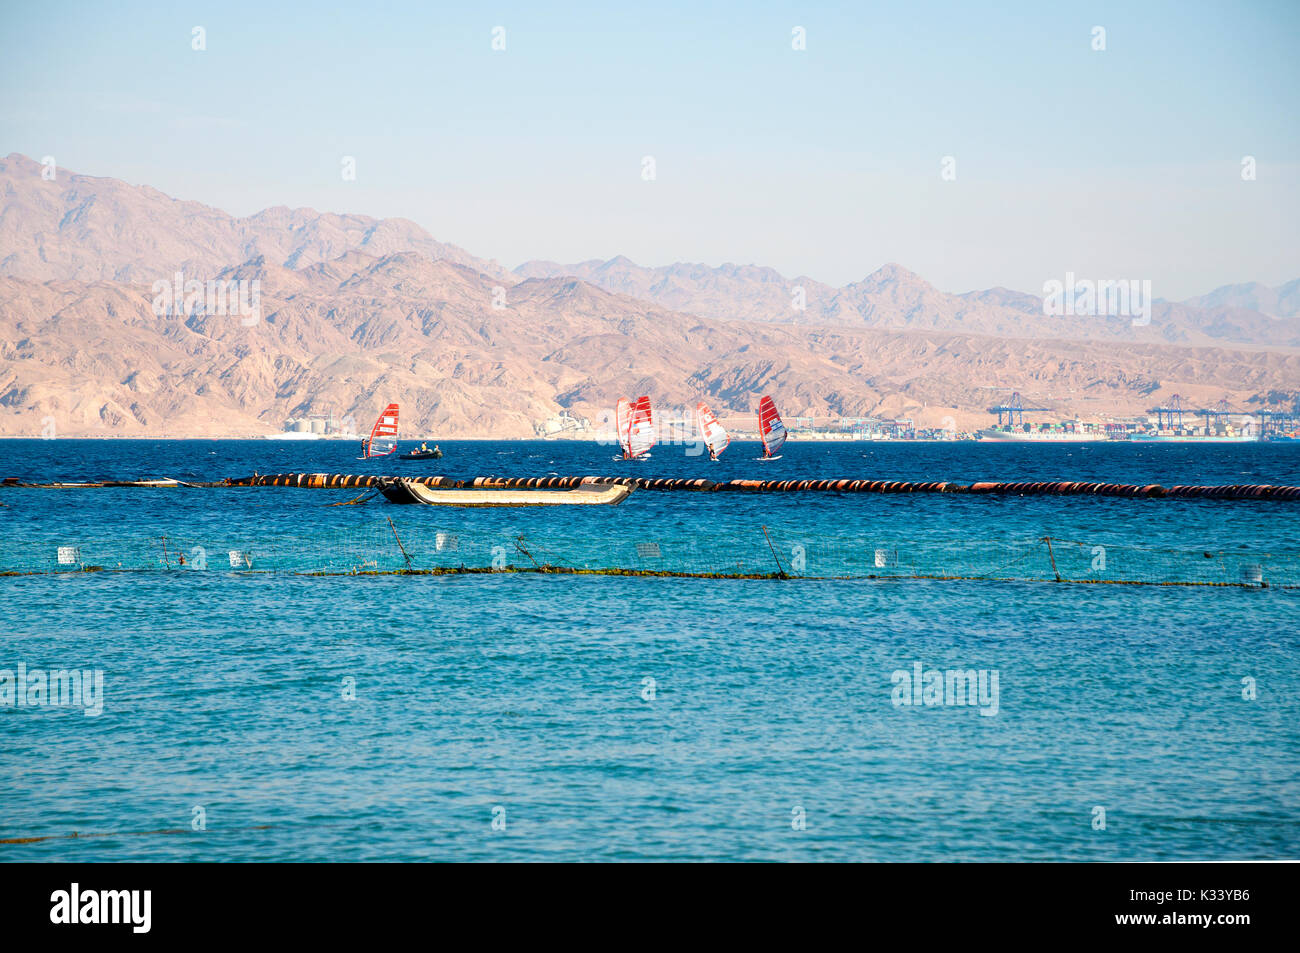 The Red Sea, Eilat, Israel Stock Photo